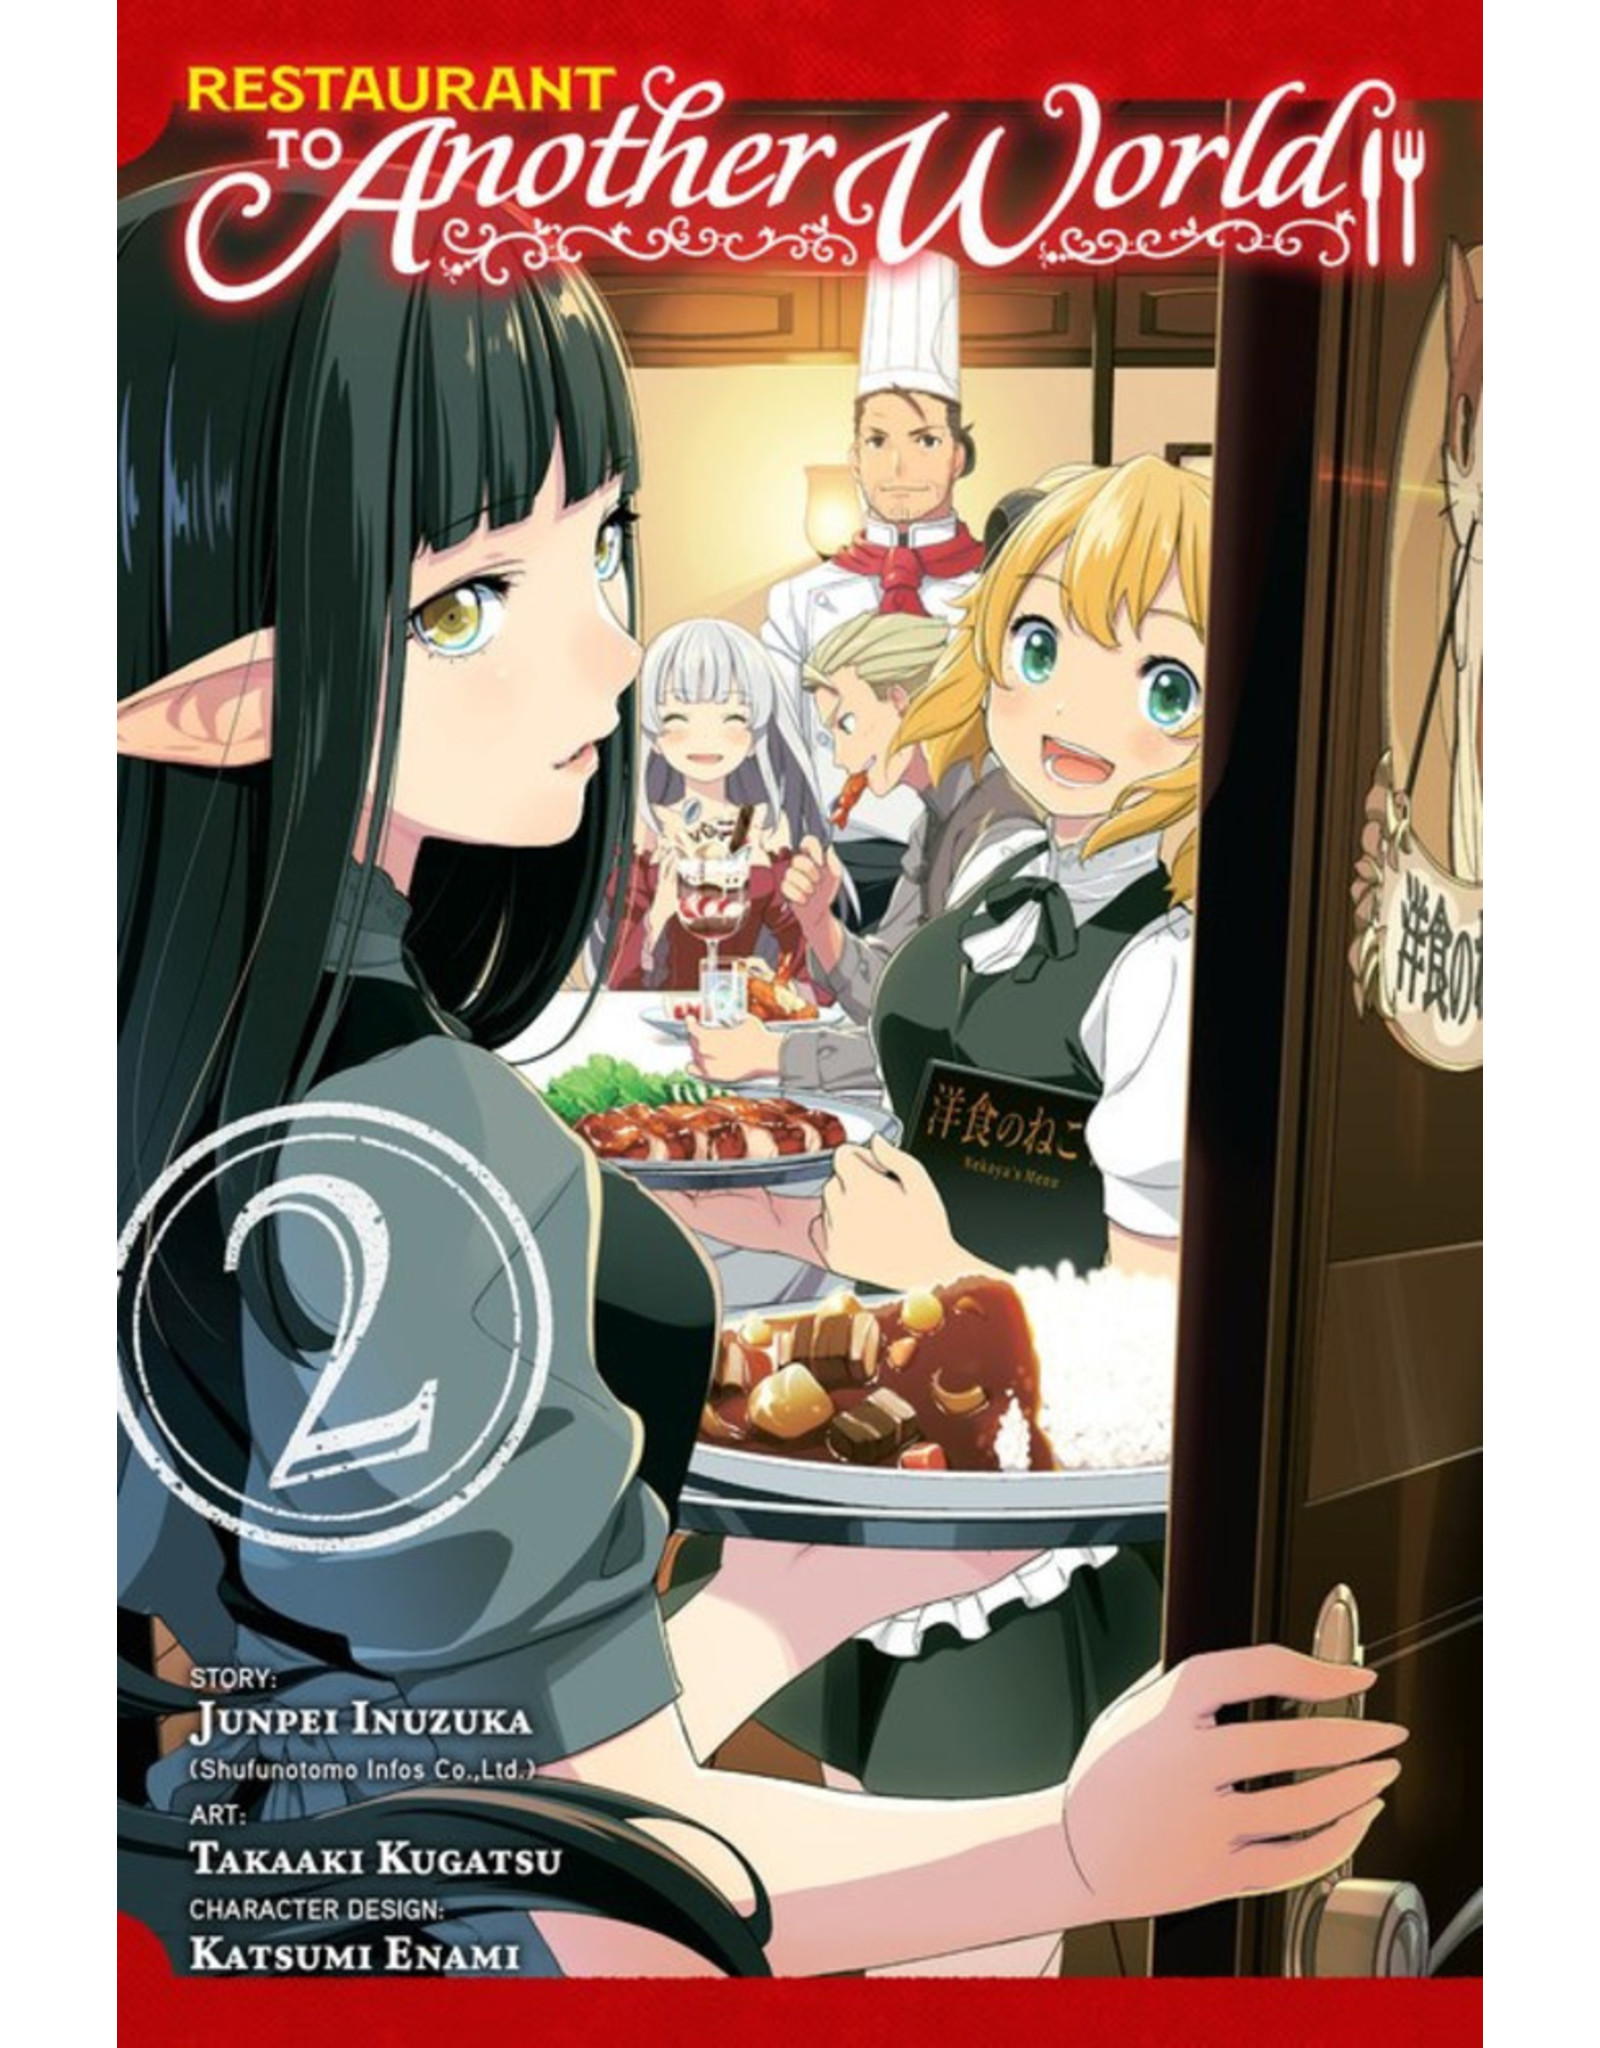 Resturant To Another World Vol. 2 Manga